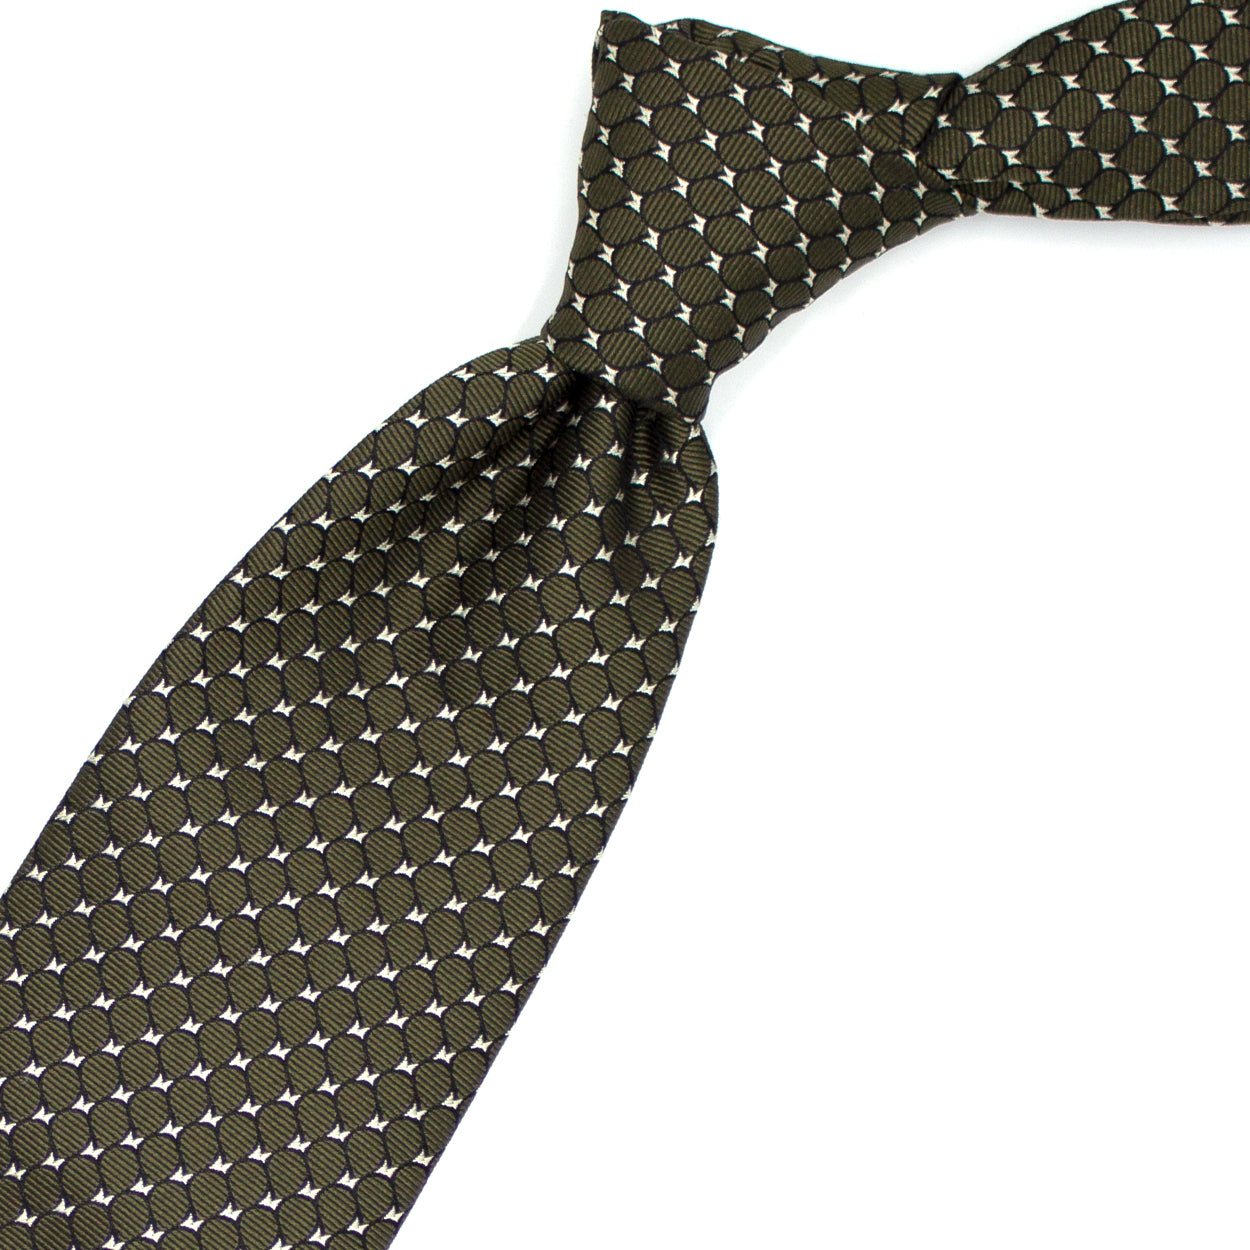 Green tie with blue and white geometric pattern